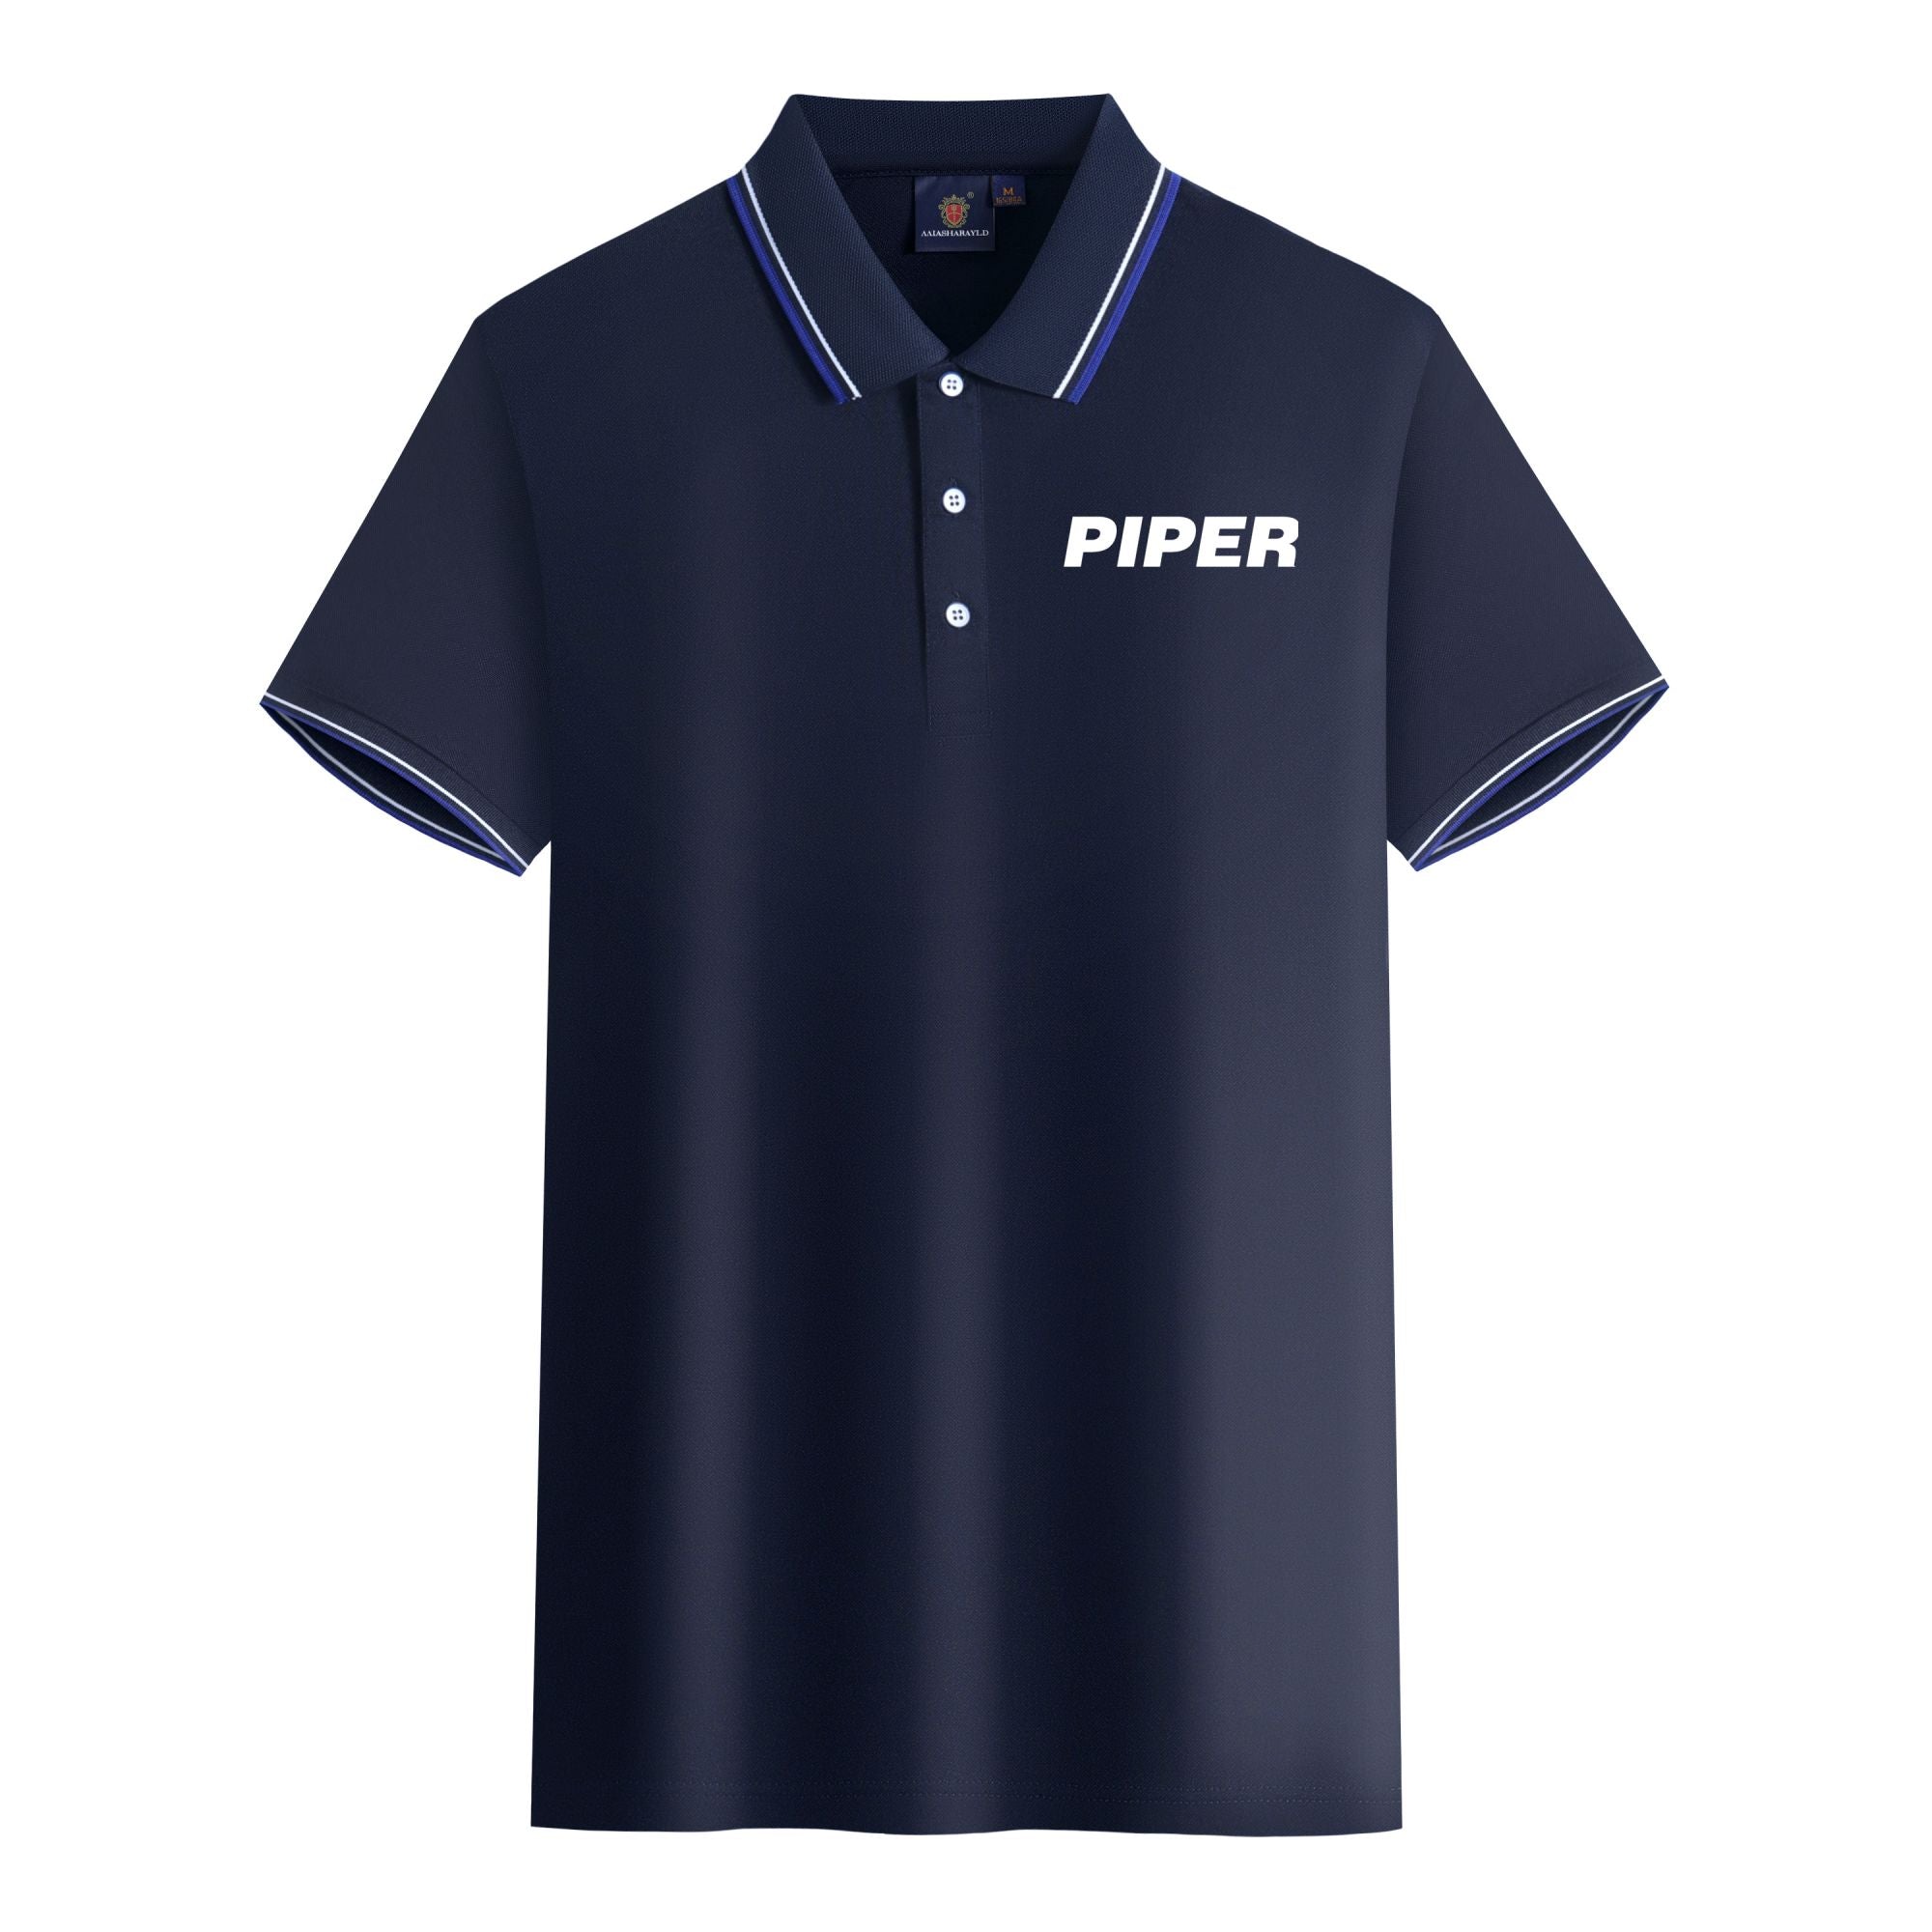 Piper & Text Designed Stylish Polo T-Shirts